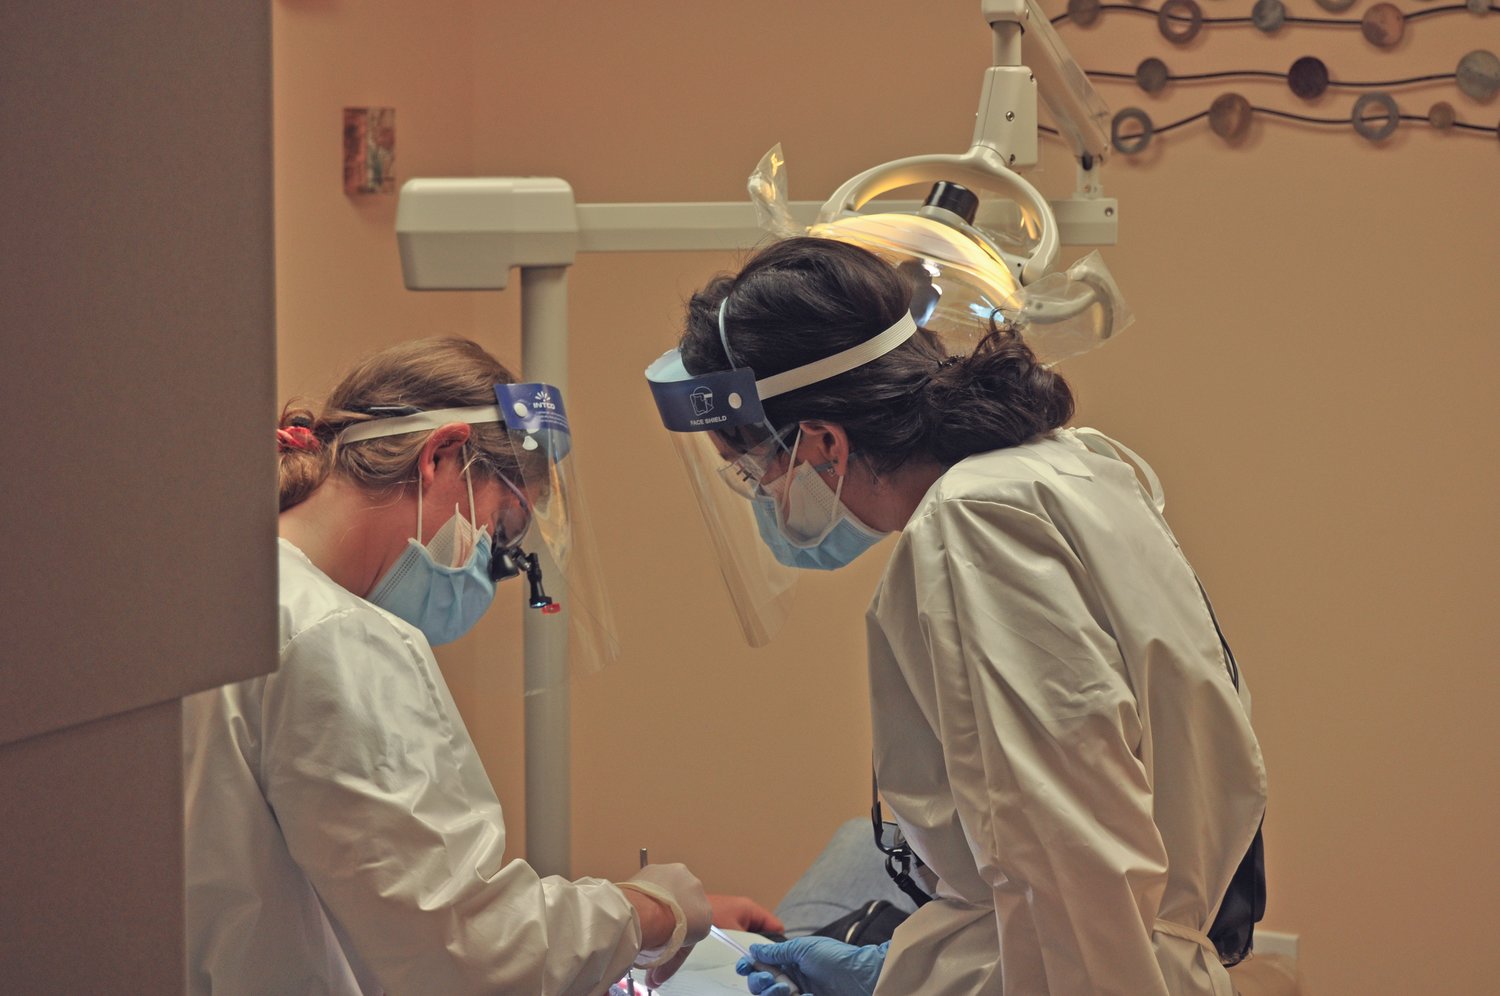 Dental students Nicole Quint, left, and Leah Bullock work on a patient at the Dr. Mary Ludwig Montgomery County Free Clinic on Saturday. Weekly urgent dental care clinics are scheduled at the clinic.